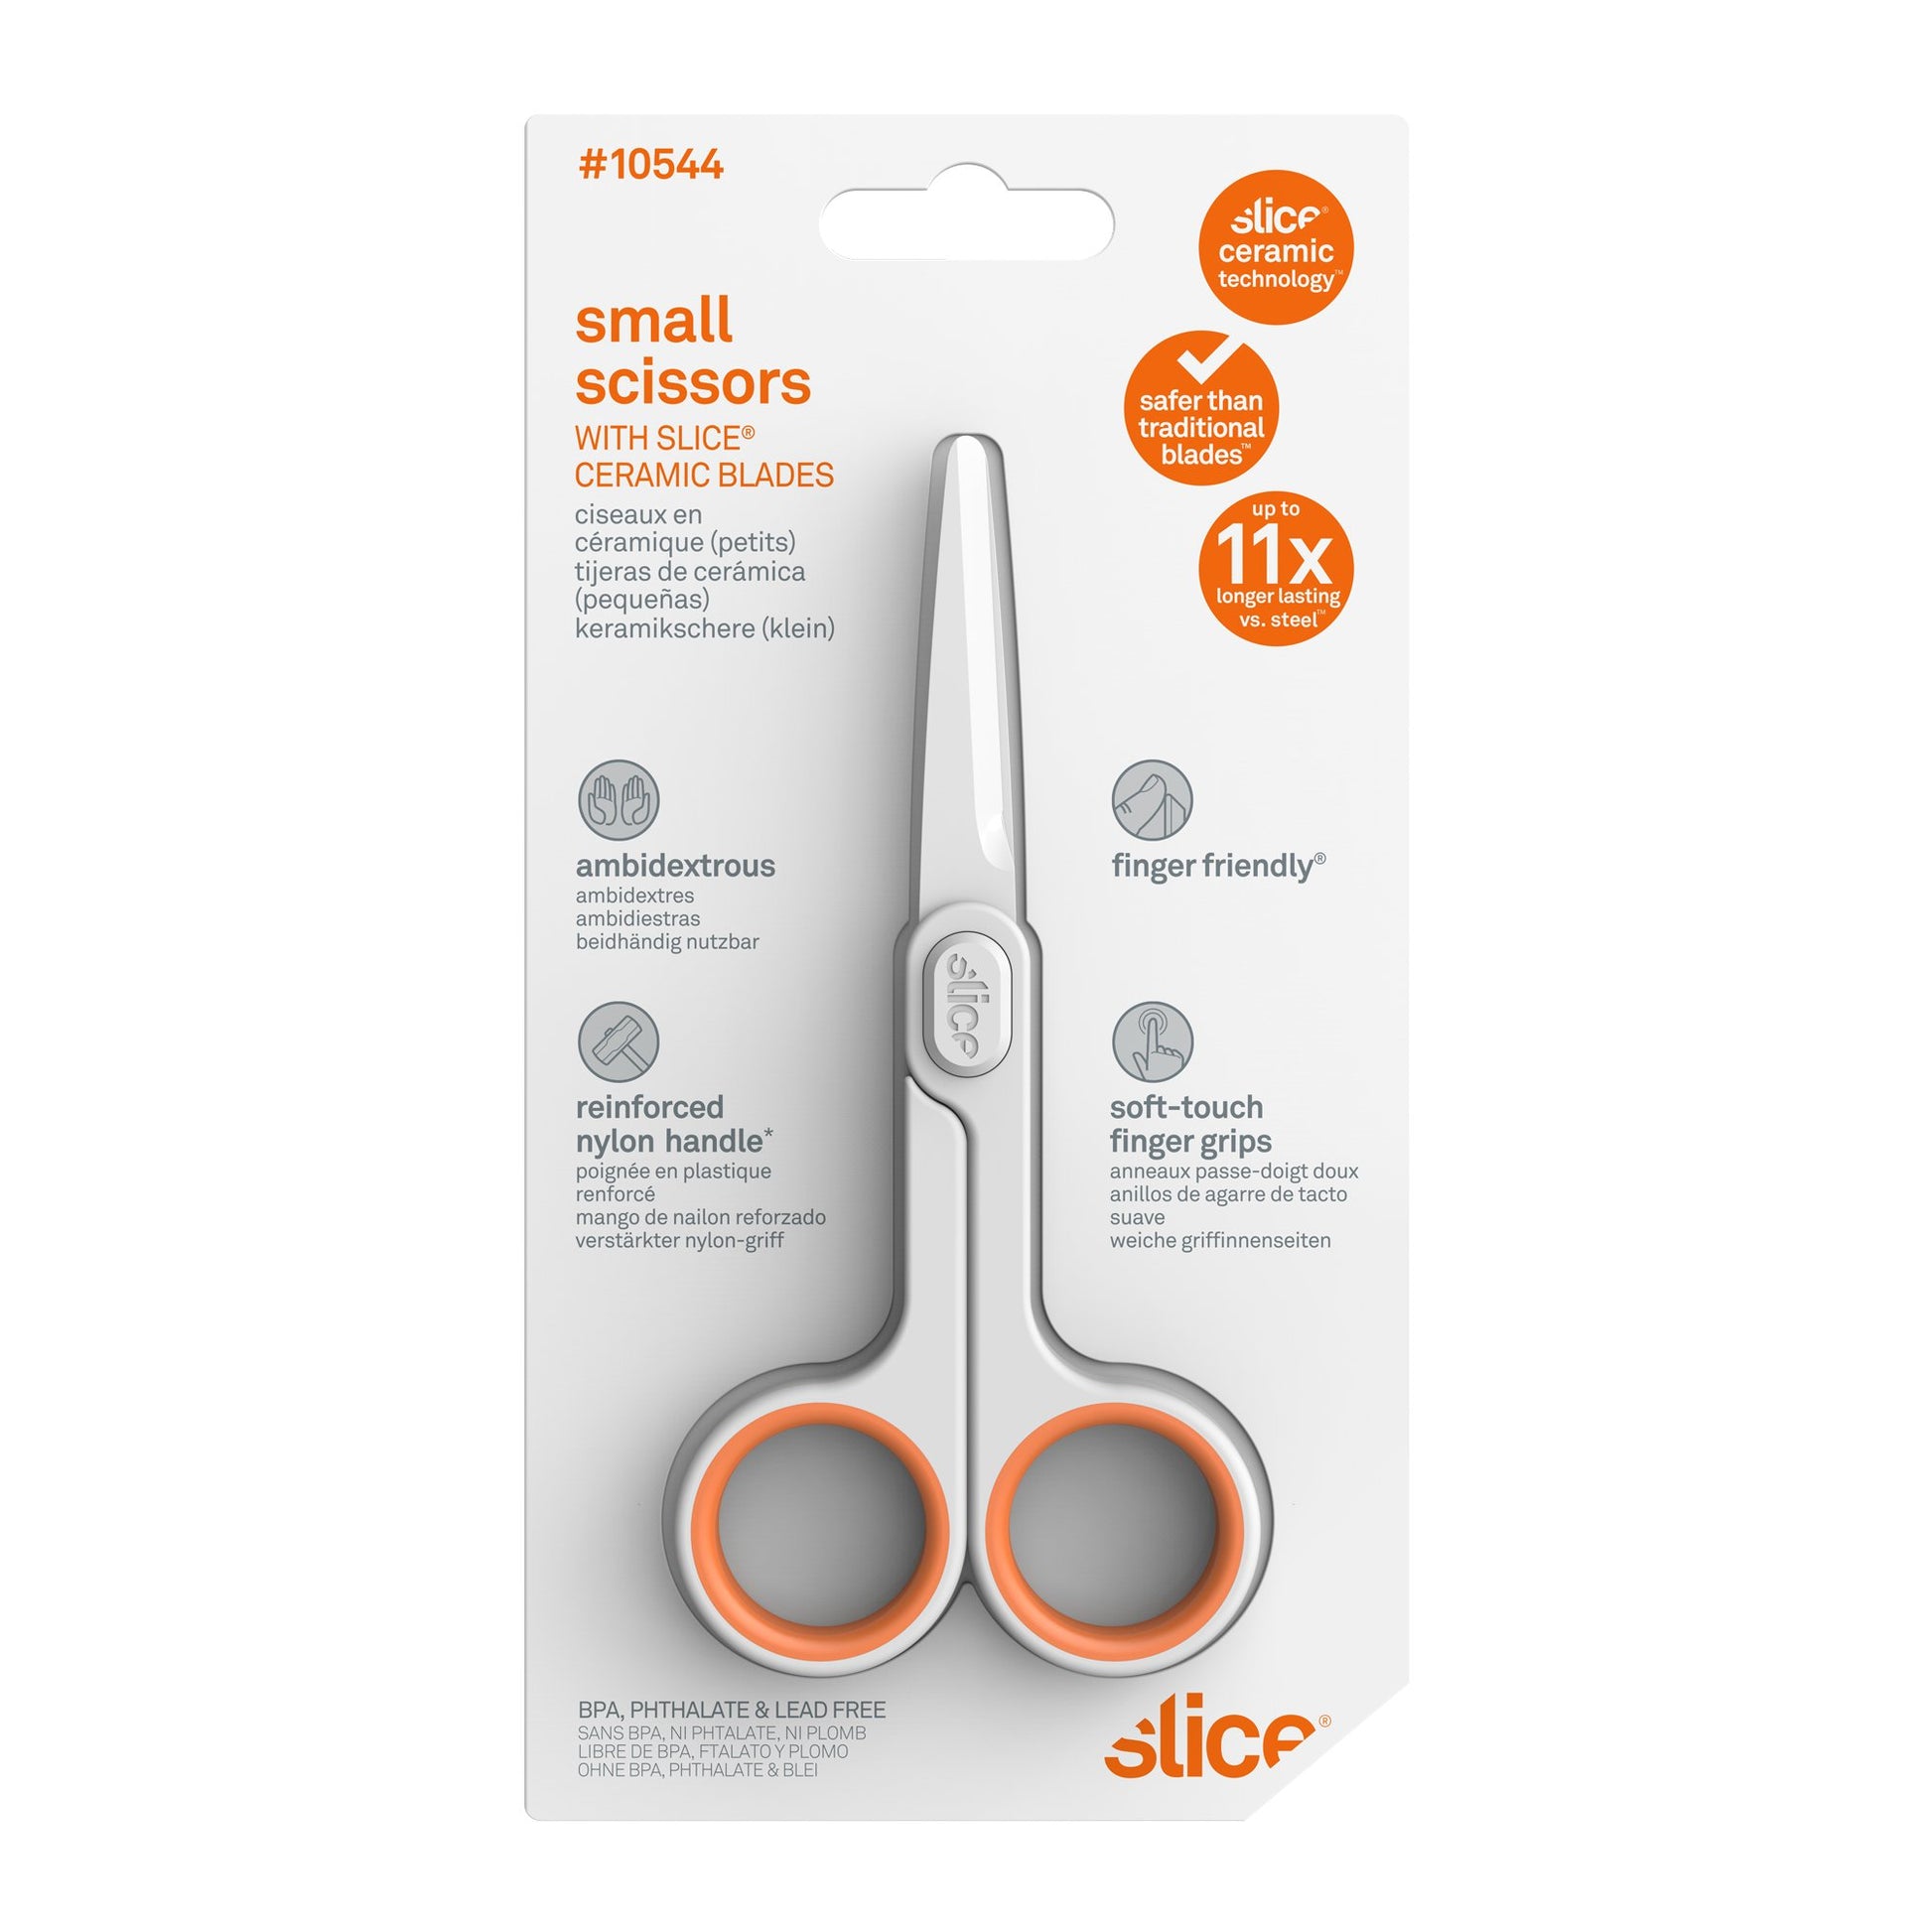 Compact & Protected: Mini Scissors for Safe & Precise Paper Cutting